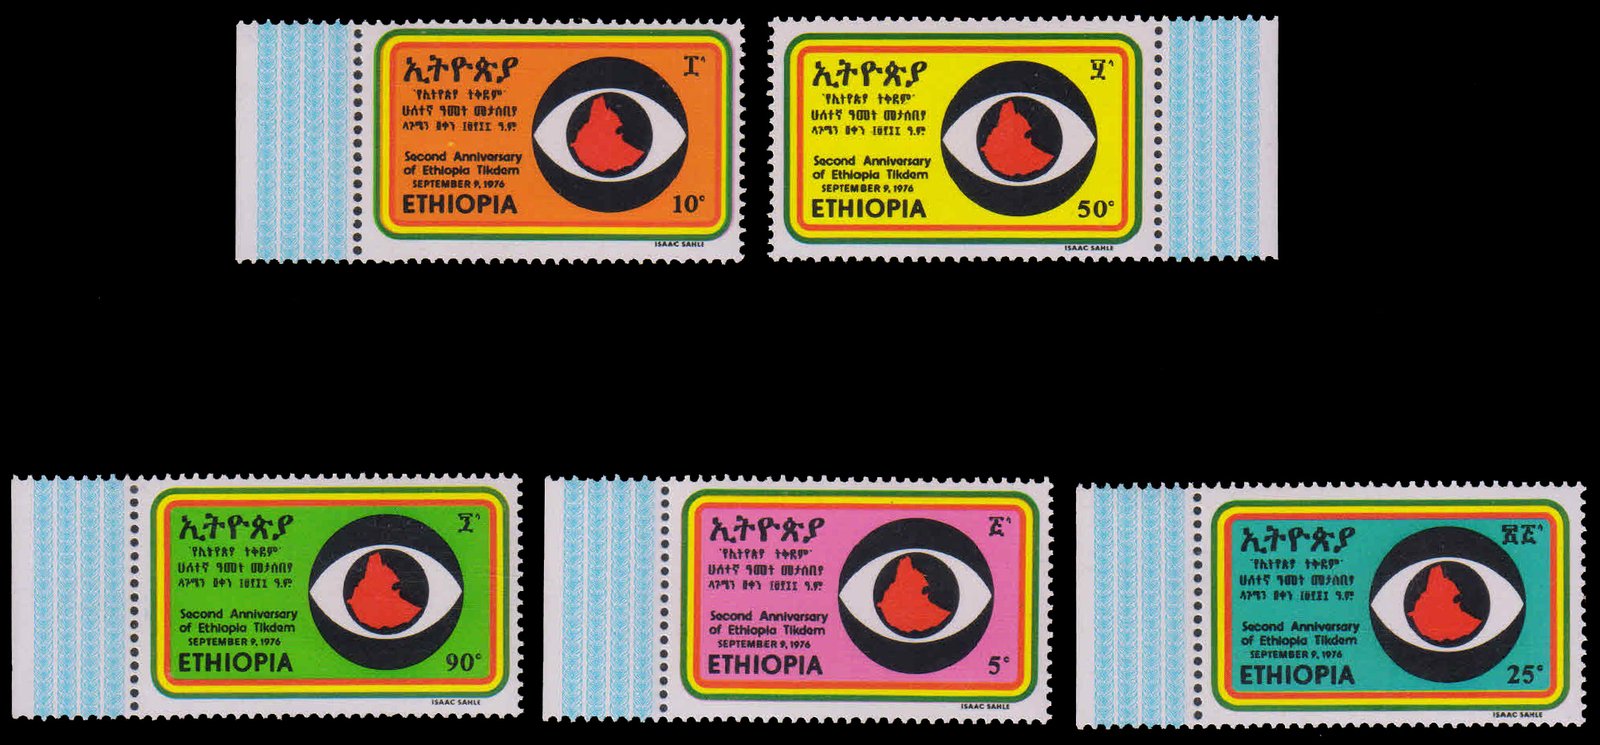 ETHIOPIA 1976-Map Emblem, 2nd Anniv. of Republic, Complete Set of 5, MNH, S.G. 979-983